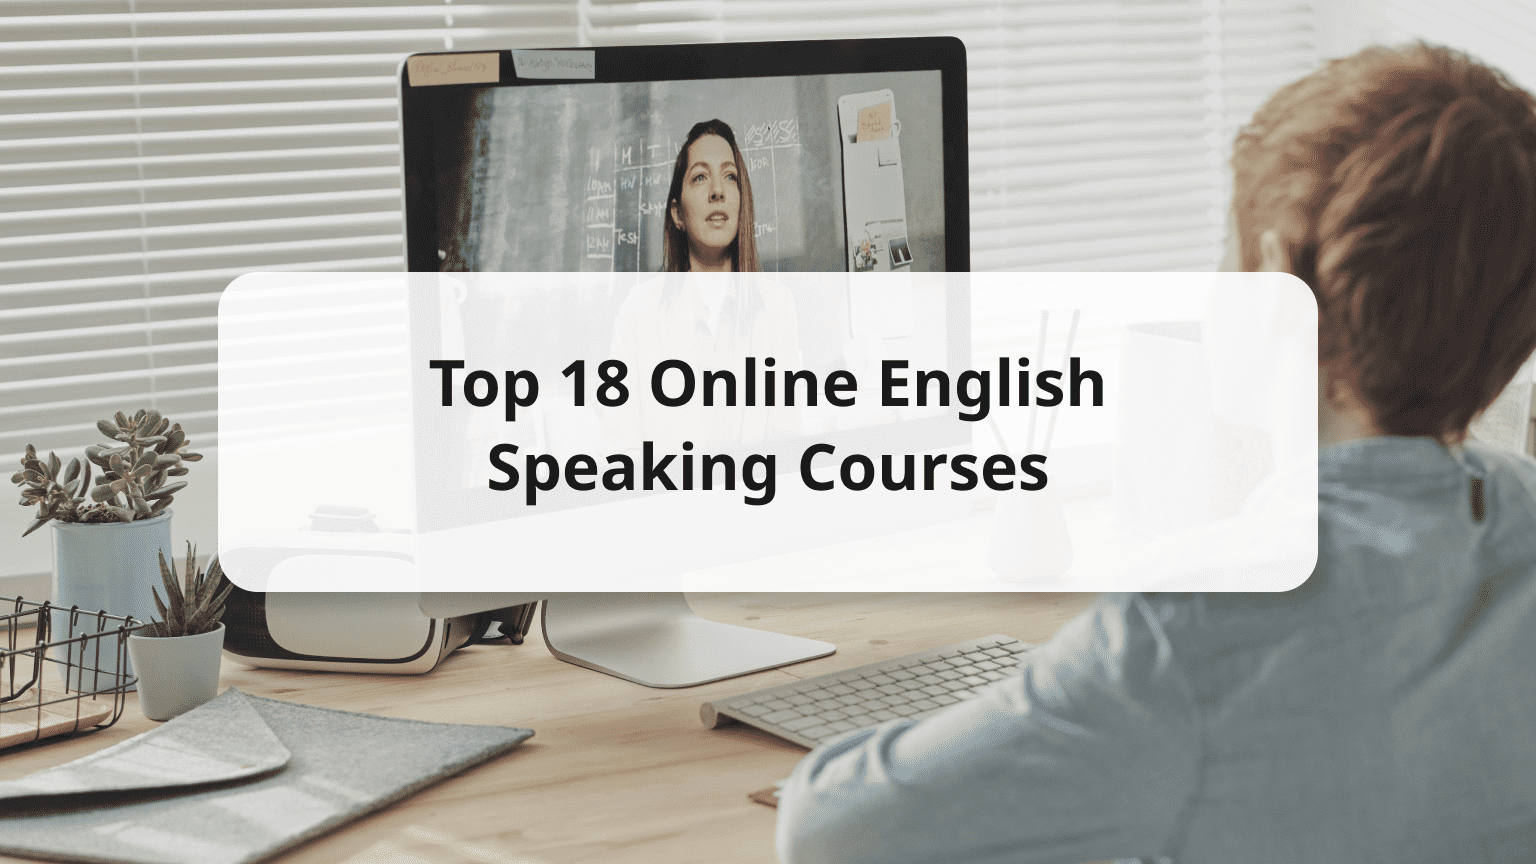 English courses online, Learn English online